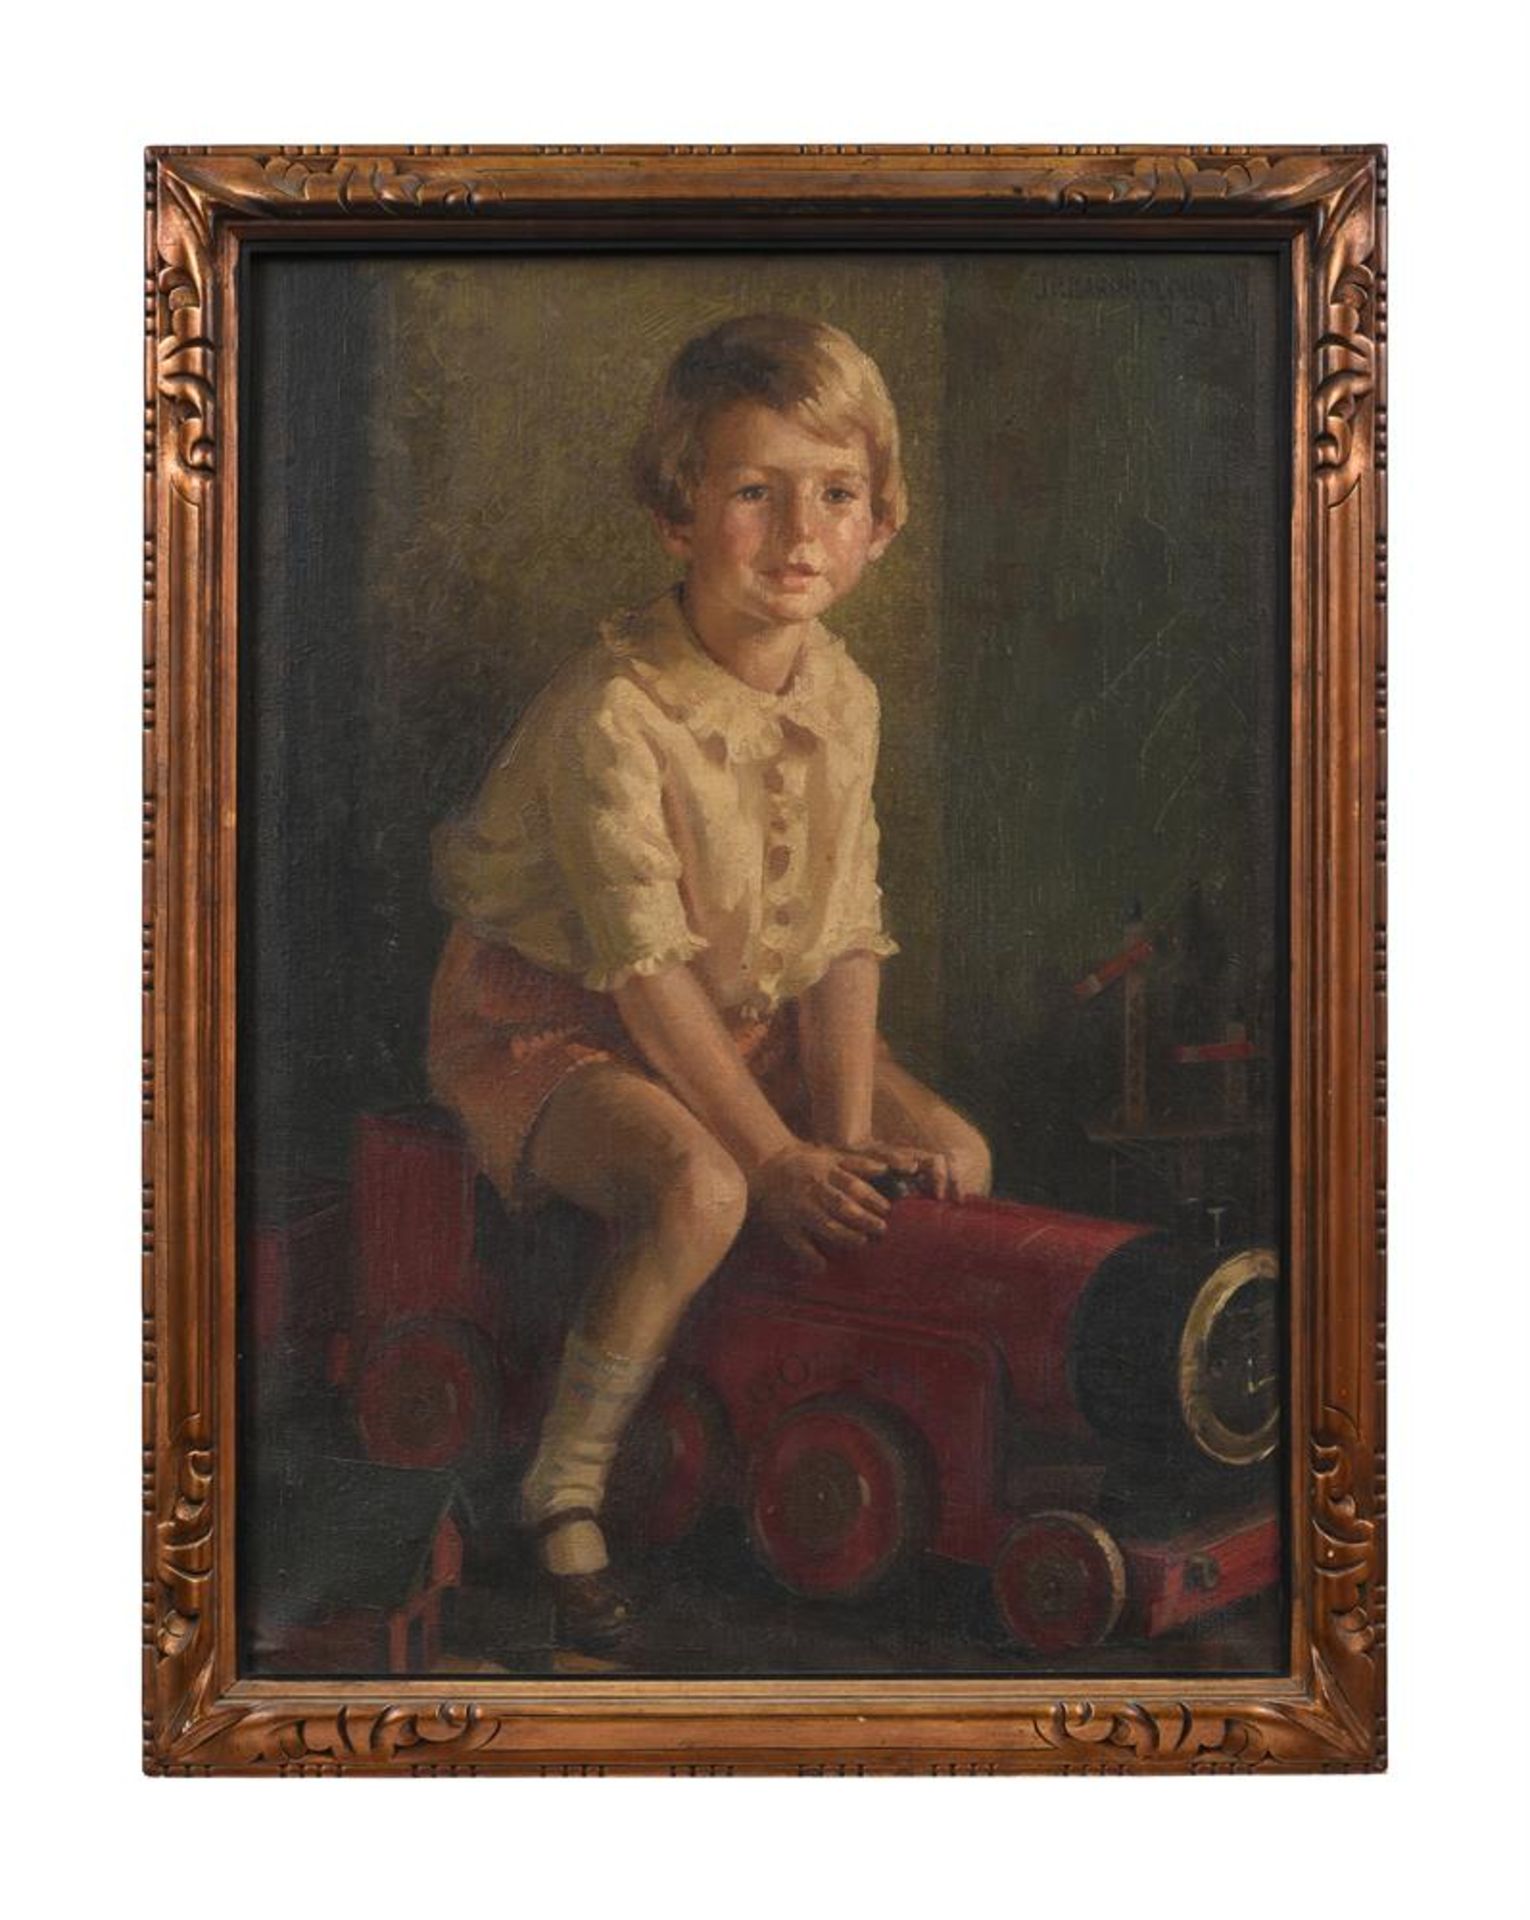 JAMES P. BARRACLOUGH (BRITISH 1891-1942), PORTRAIT OF A YOUNG BOY WITH A TOY TRAIN